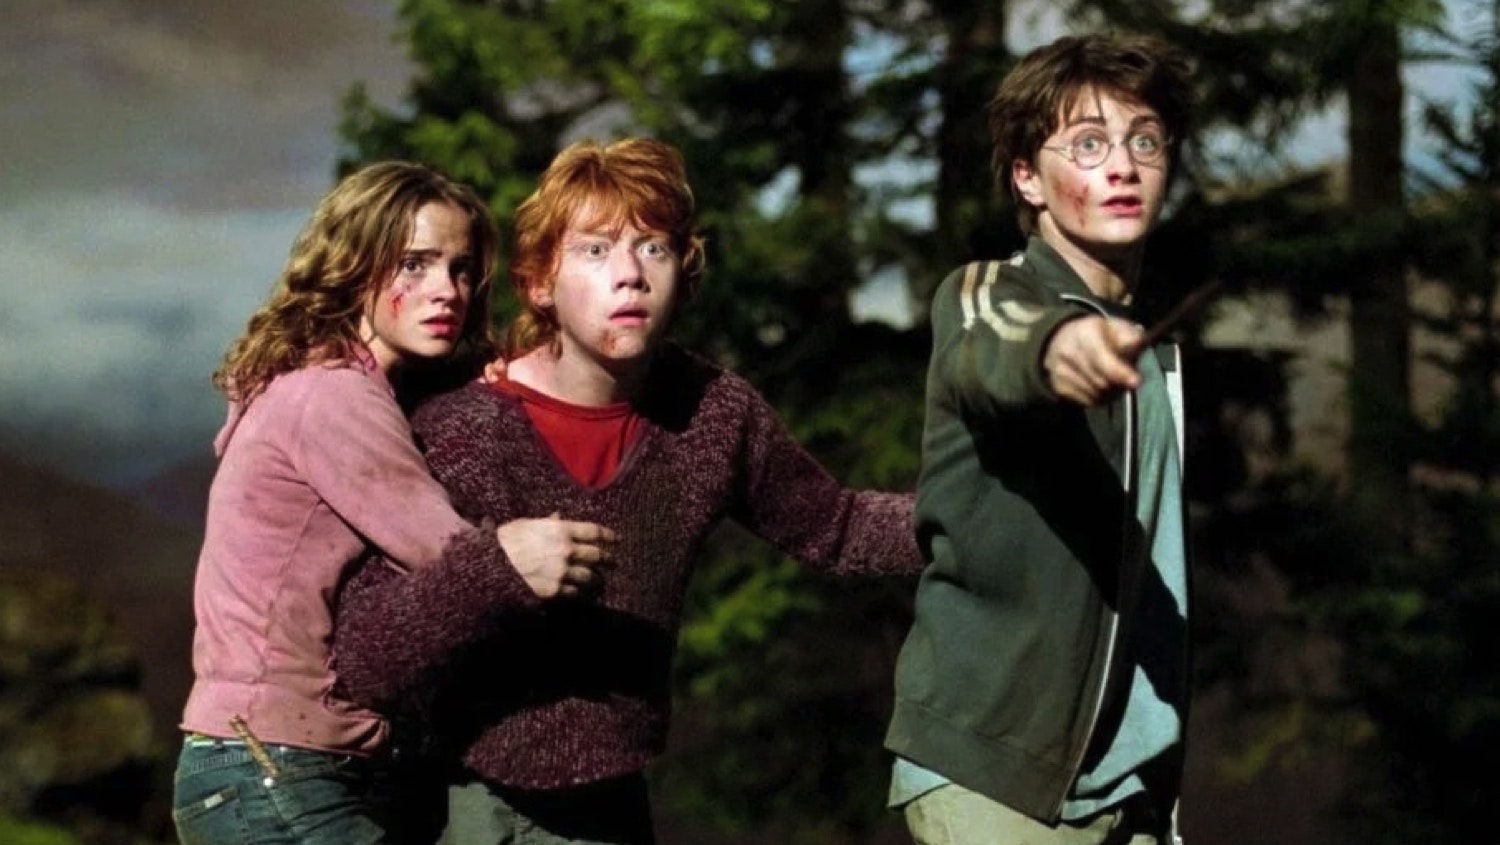 Harry Potter TV Series Based on Books Nearing Deal at HBO Max (Report)